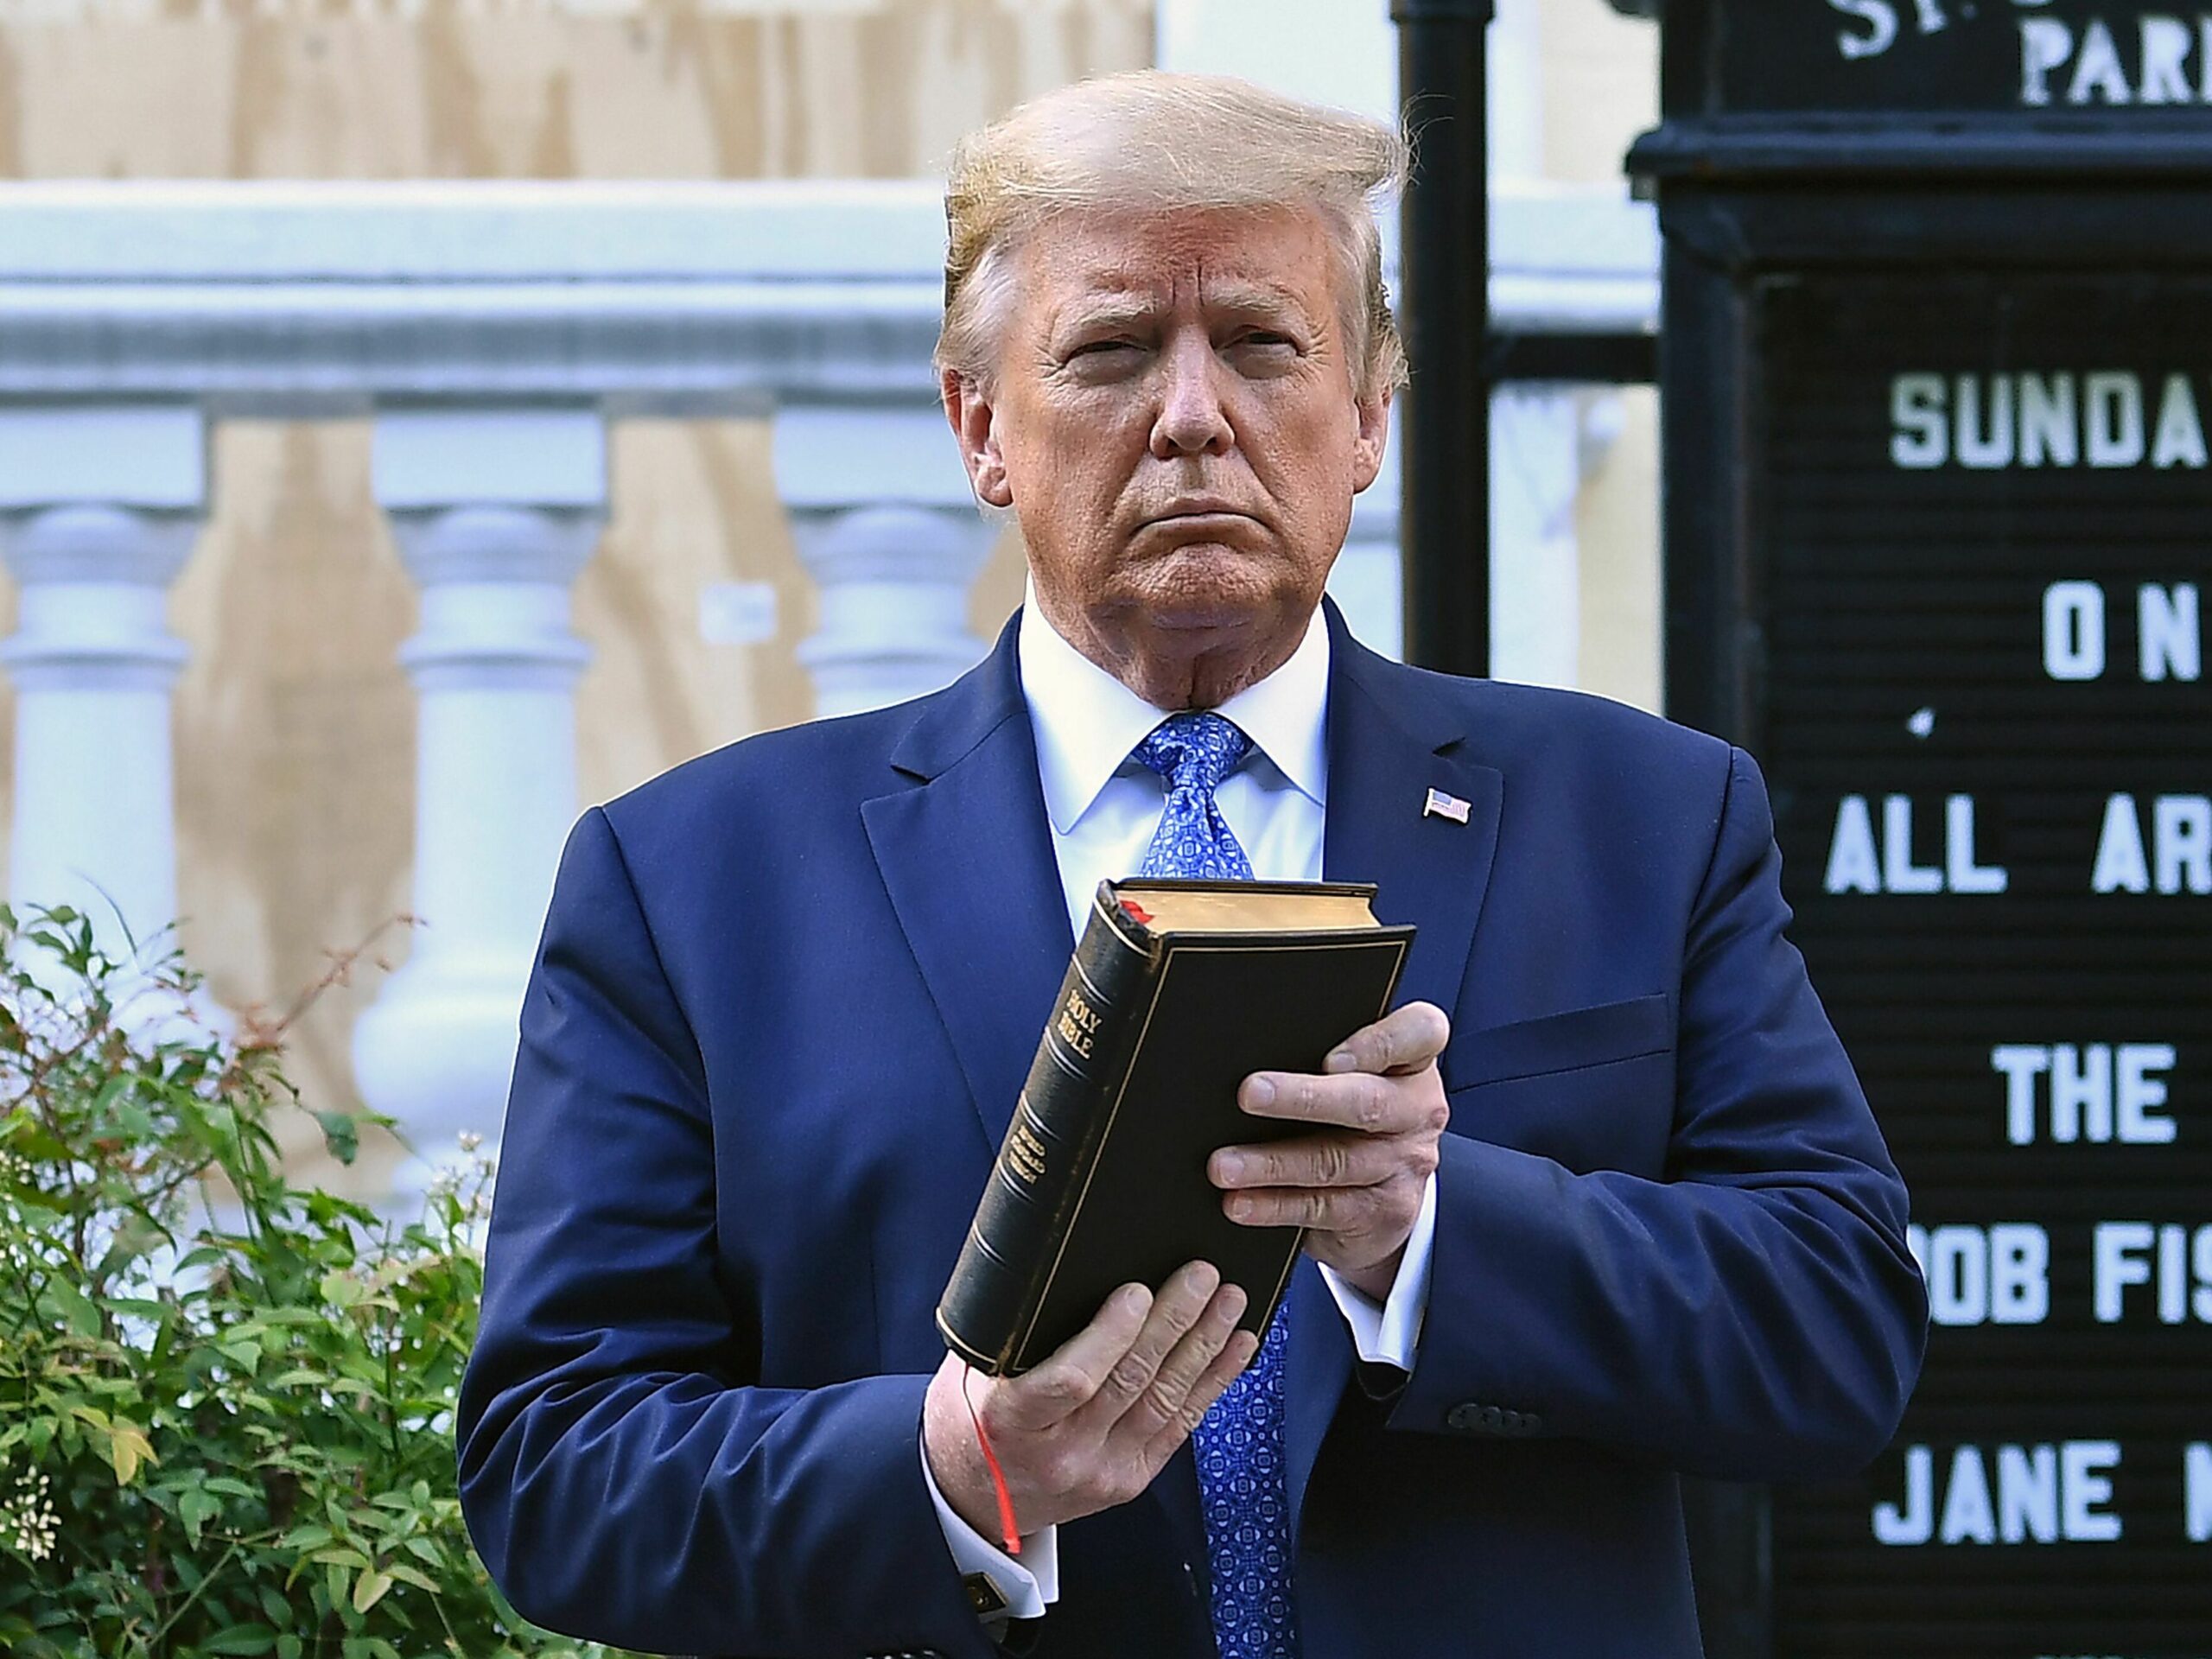 Cash-strapped Trump is now selling $60 Bibles, U.S. Constitution included